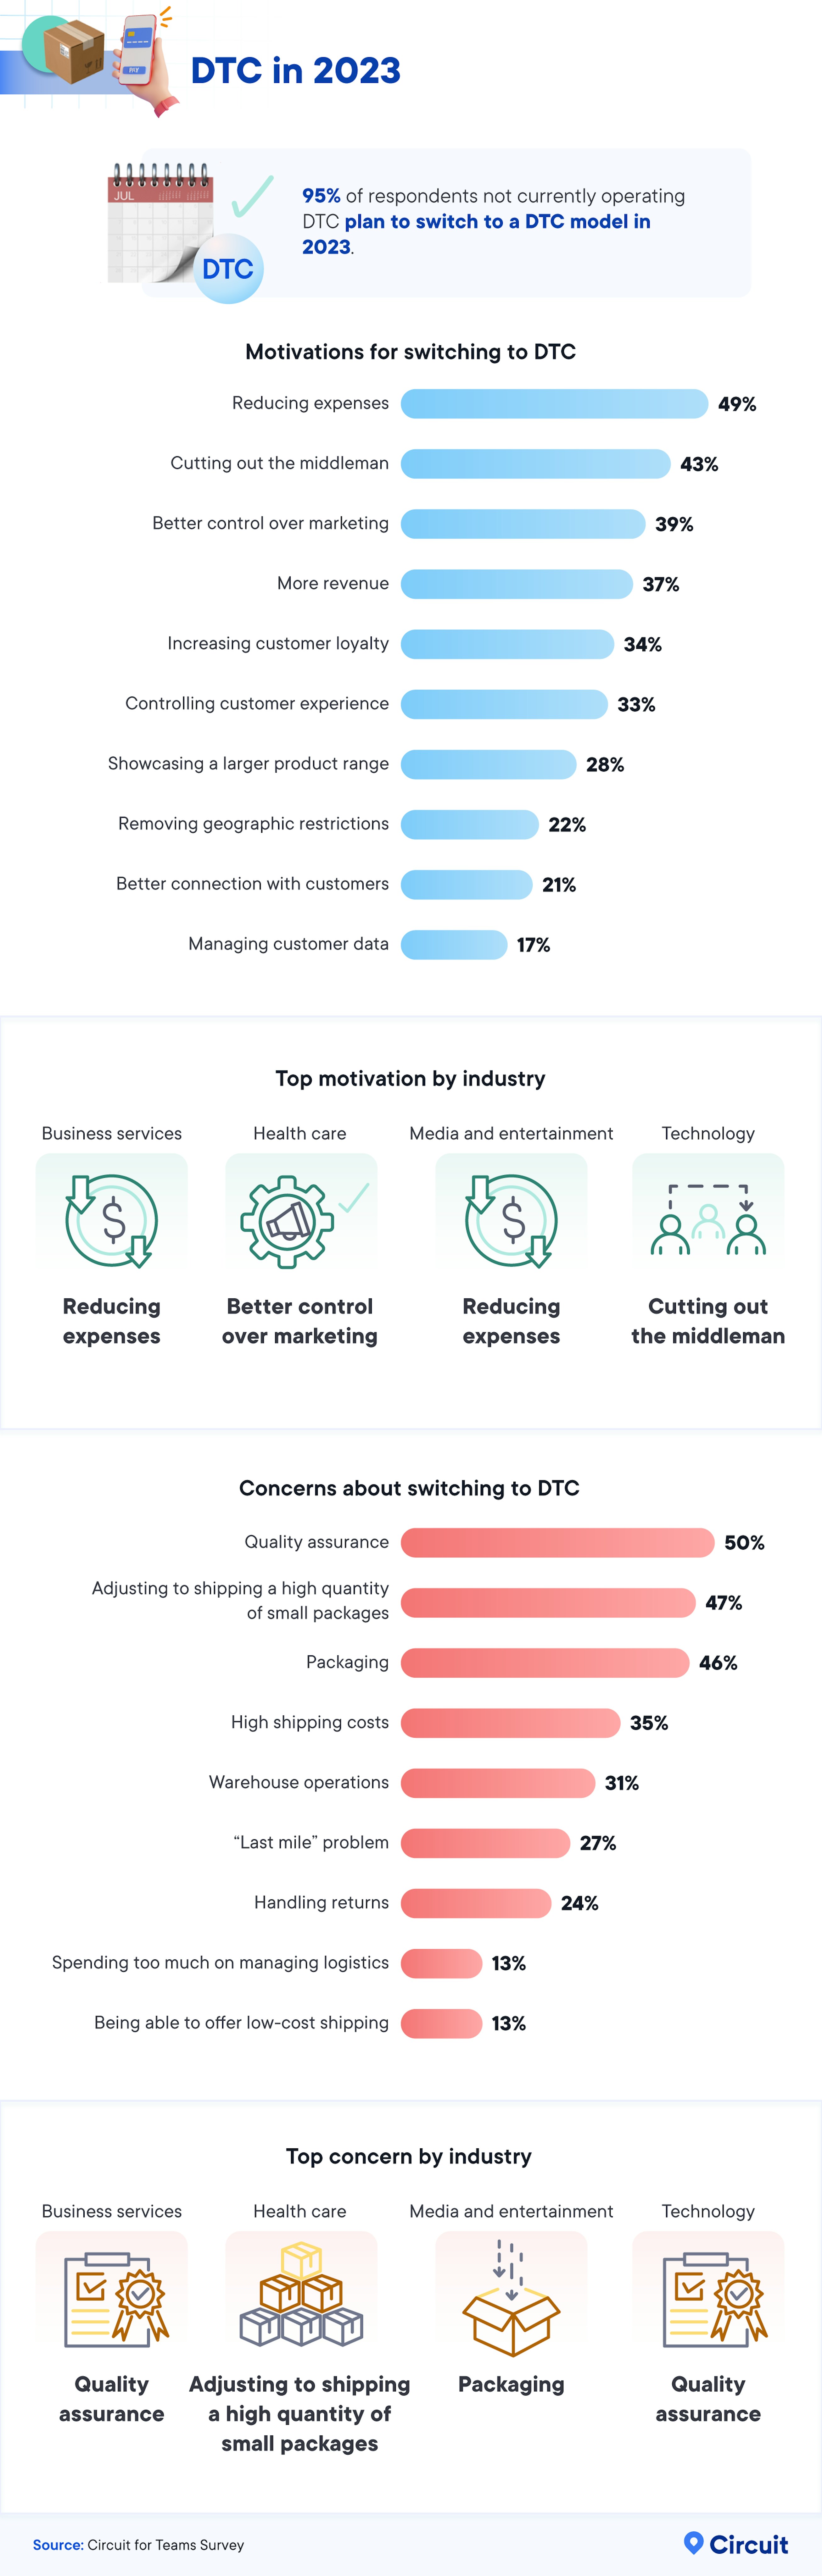 Infographic that explores the most popular motivations and concerns about switching to DTC